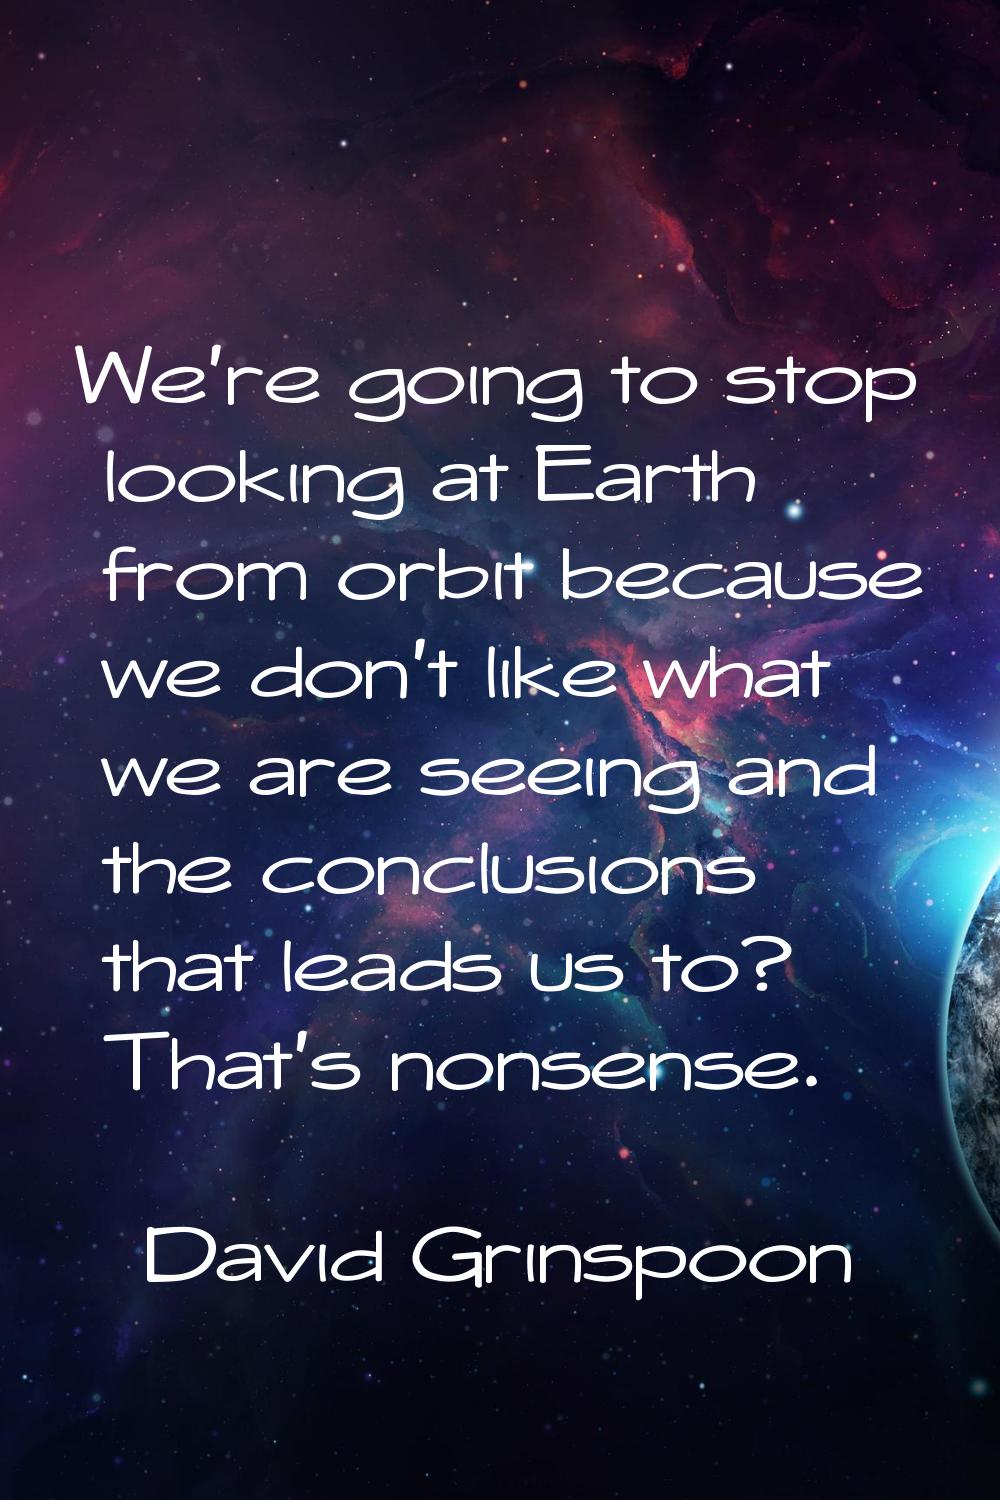 We're going to stop looking at Earth from orbit because we don't like what we are seeing and the co